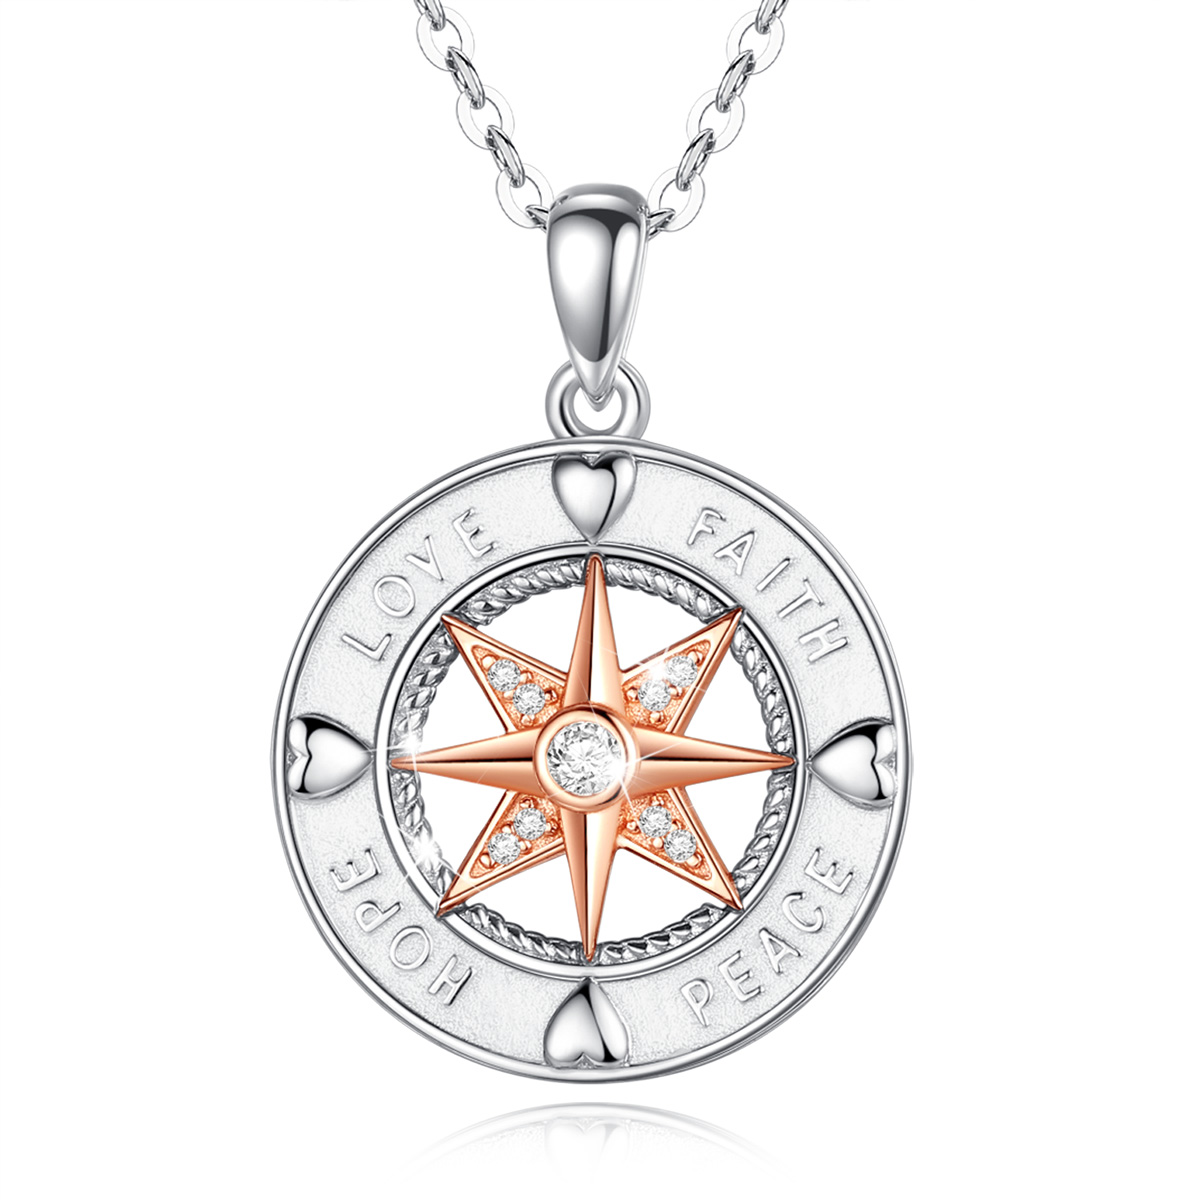 Mens Jewelry S925 Sterling Silver Vintage Oxidized Rose Gold Compass Pendant Necklace